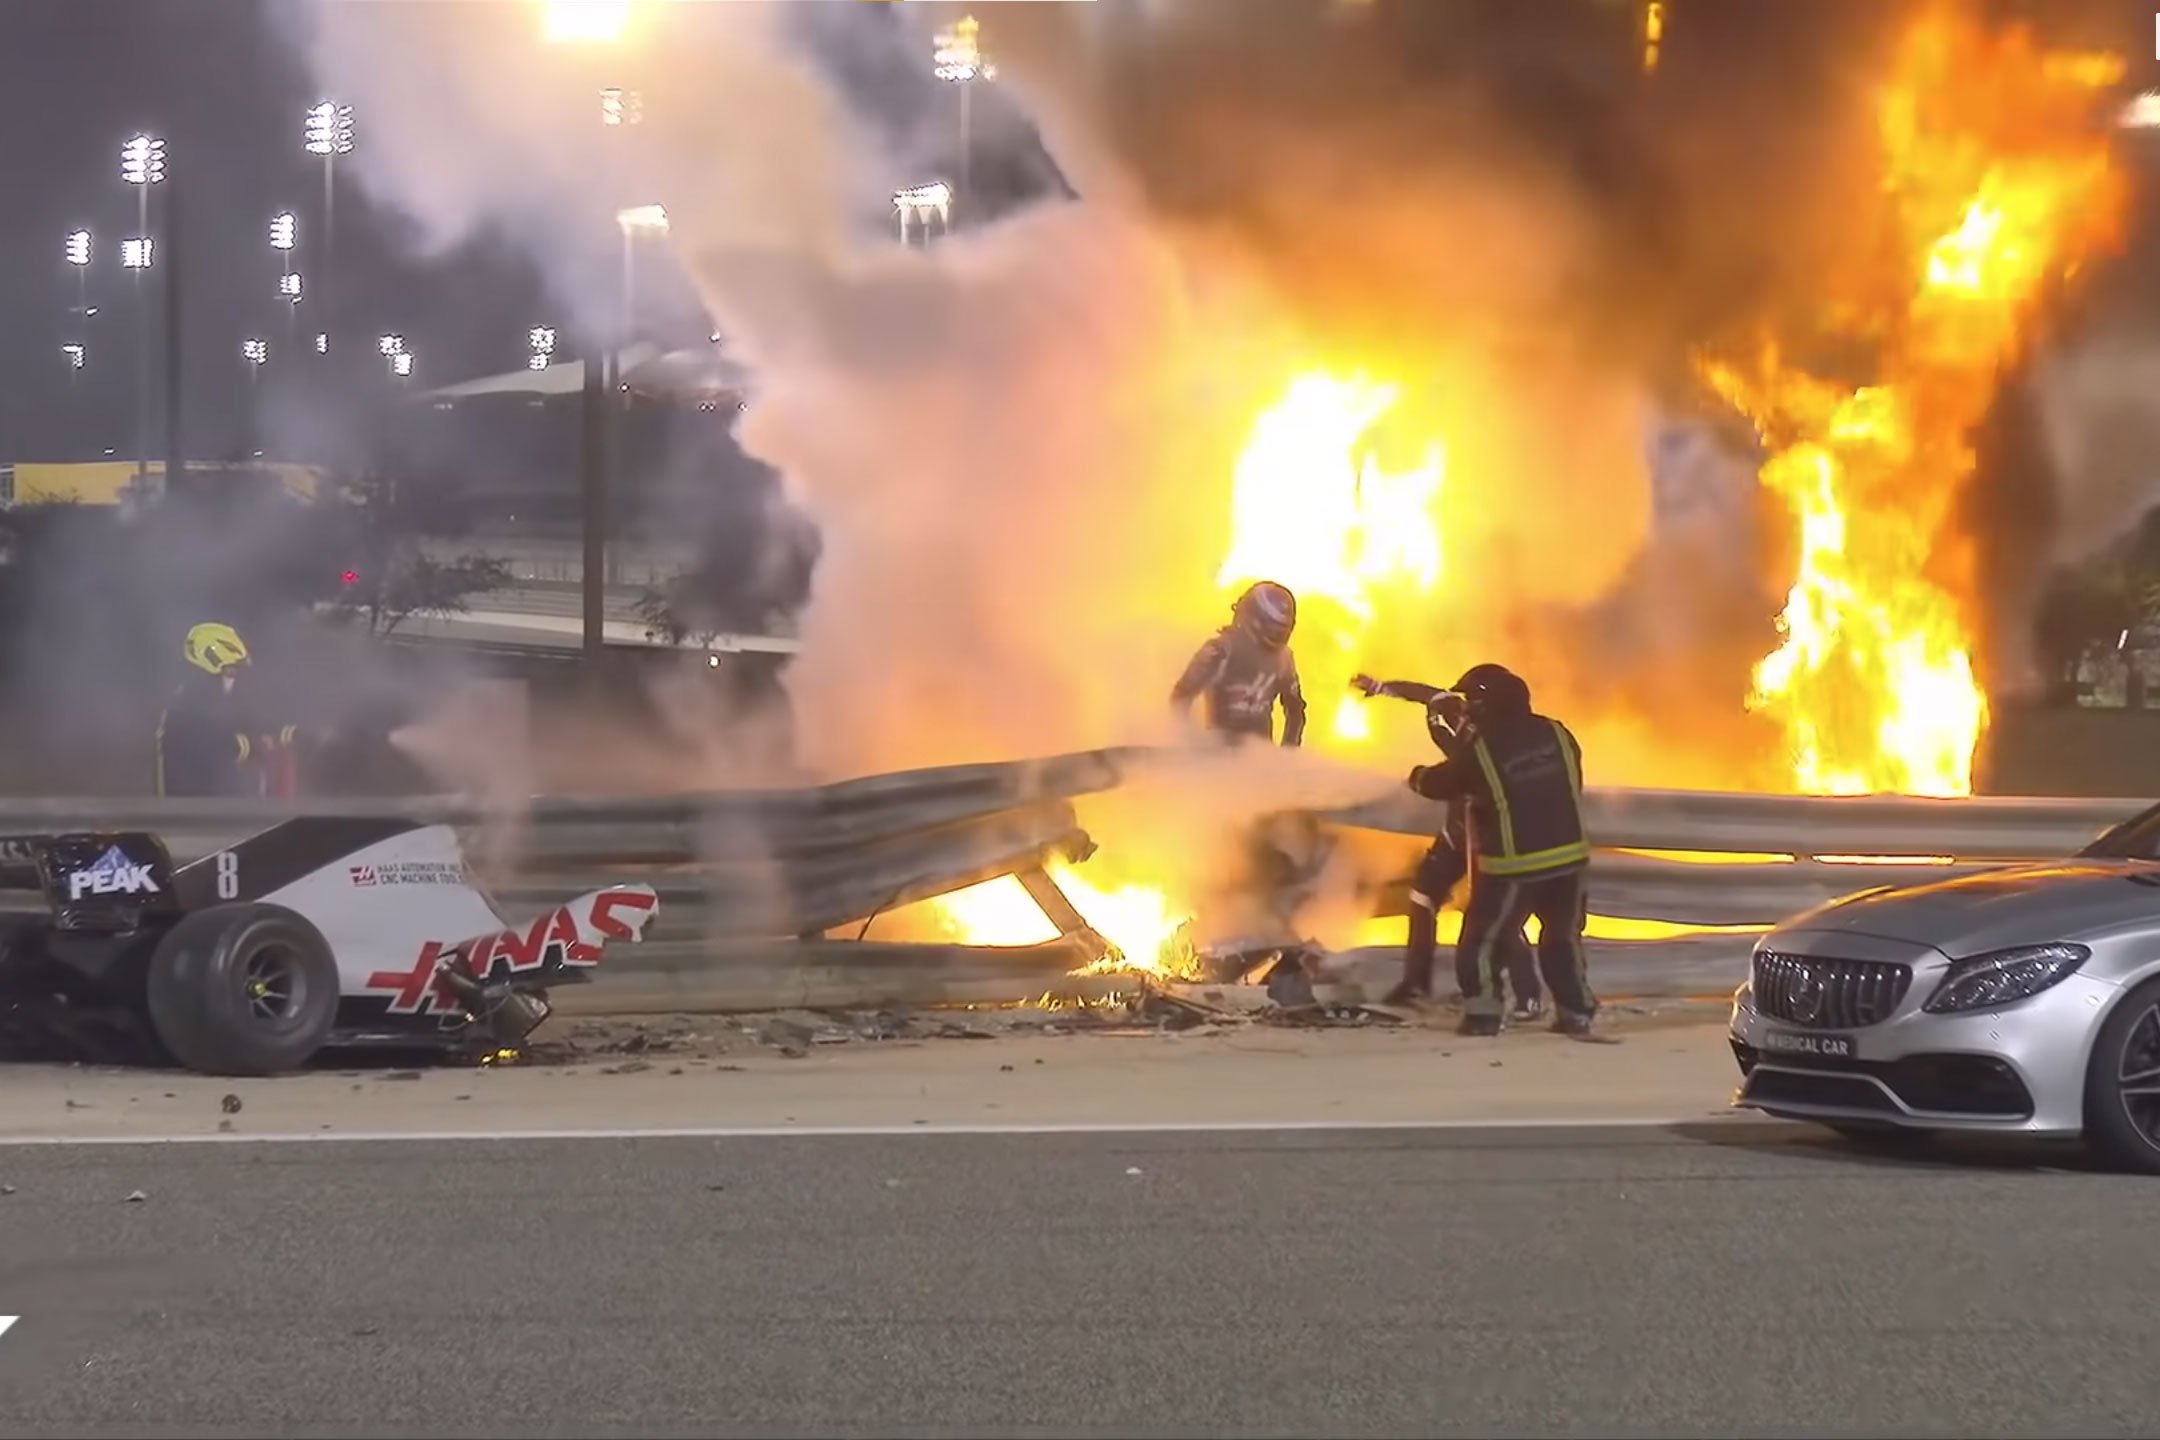 Romaine Grosjean emerges from the flames like a Phoenix after his viral 2020 horror crash. 